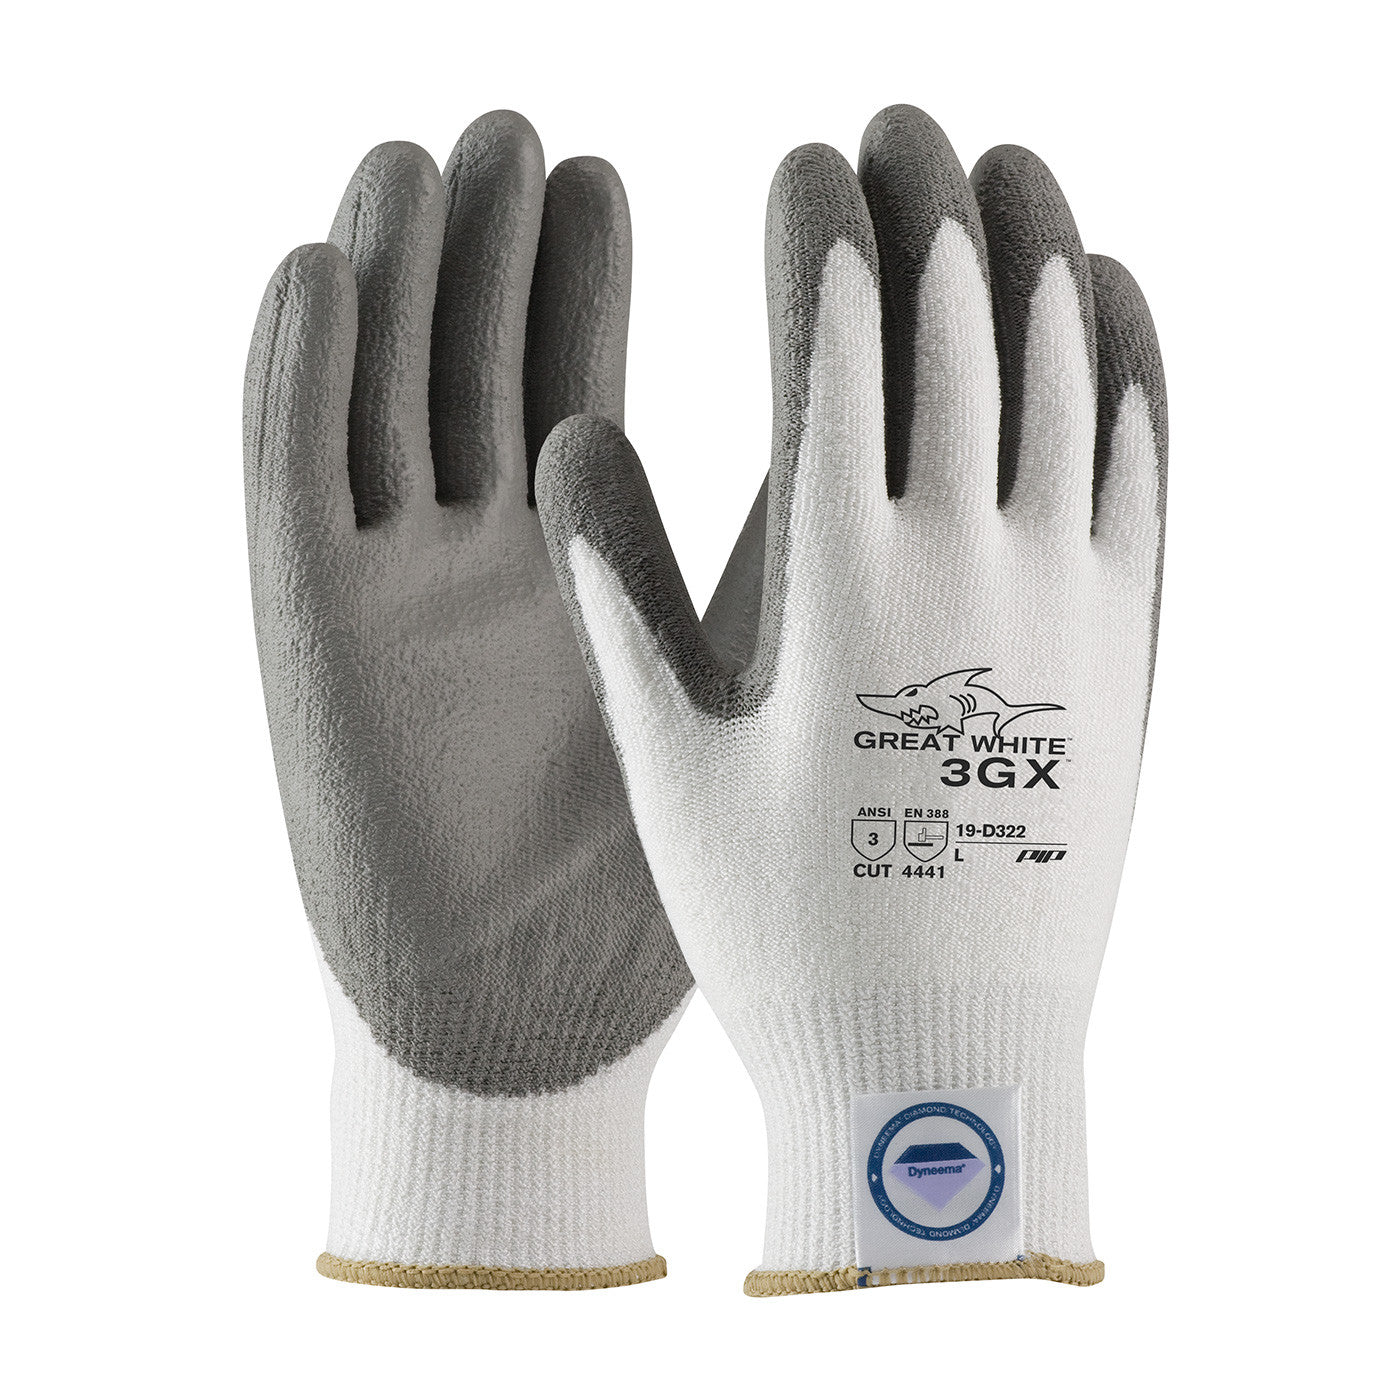 Priced Right Quality protective gloves for cutting